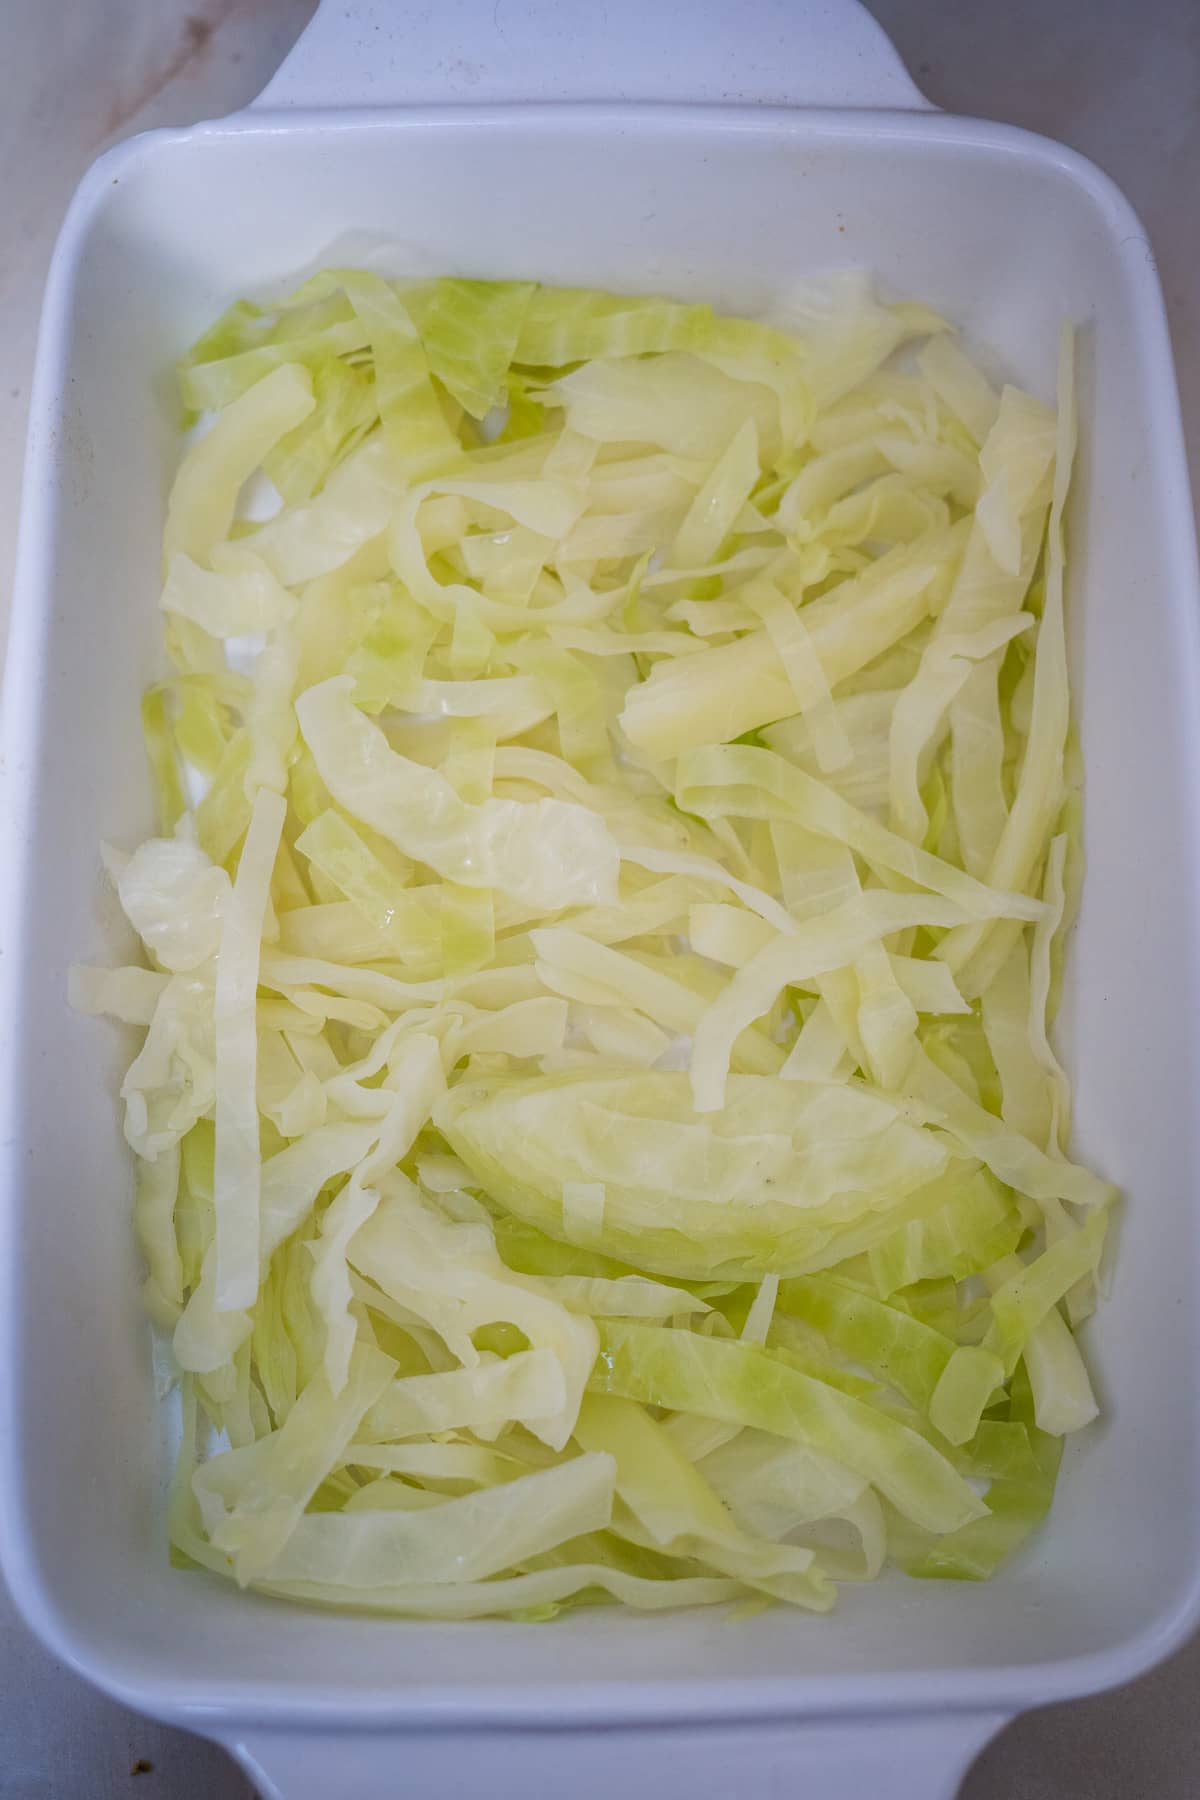 Shredded cabbage in a white baking dish.